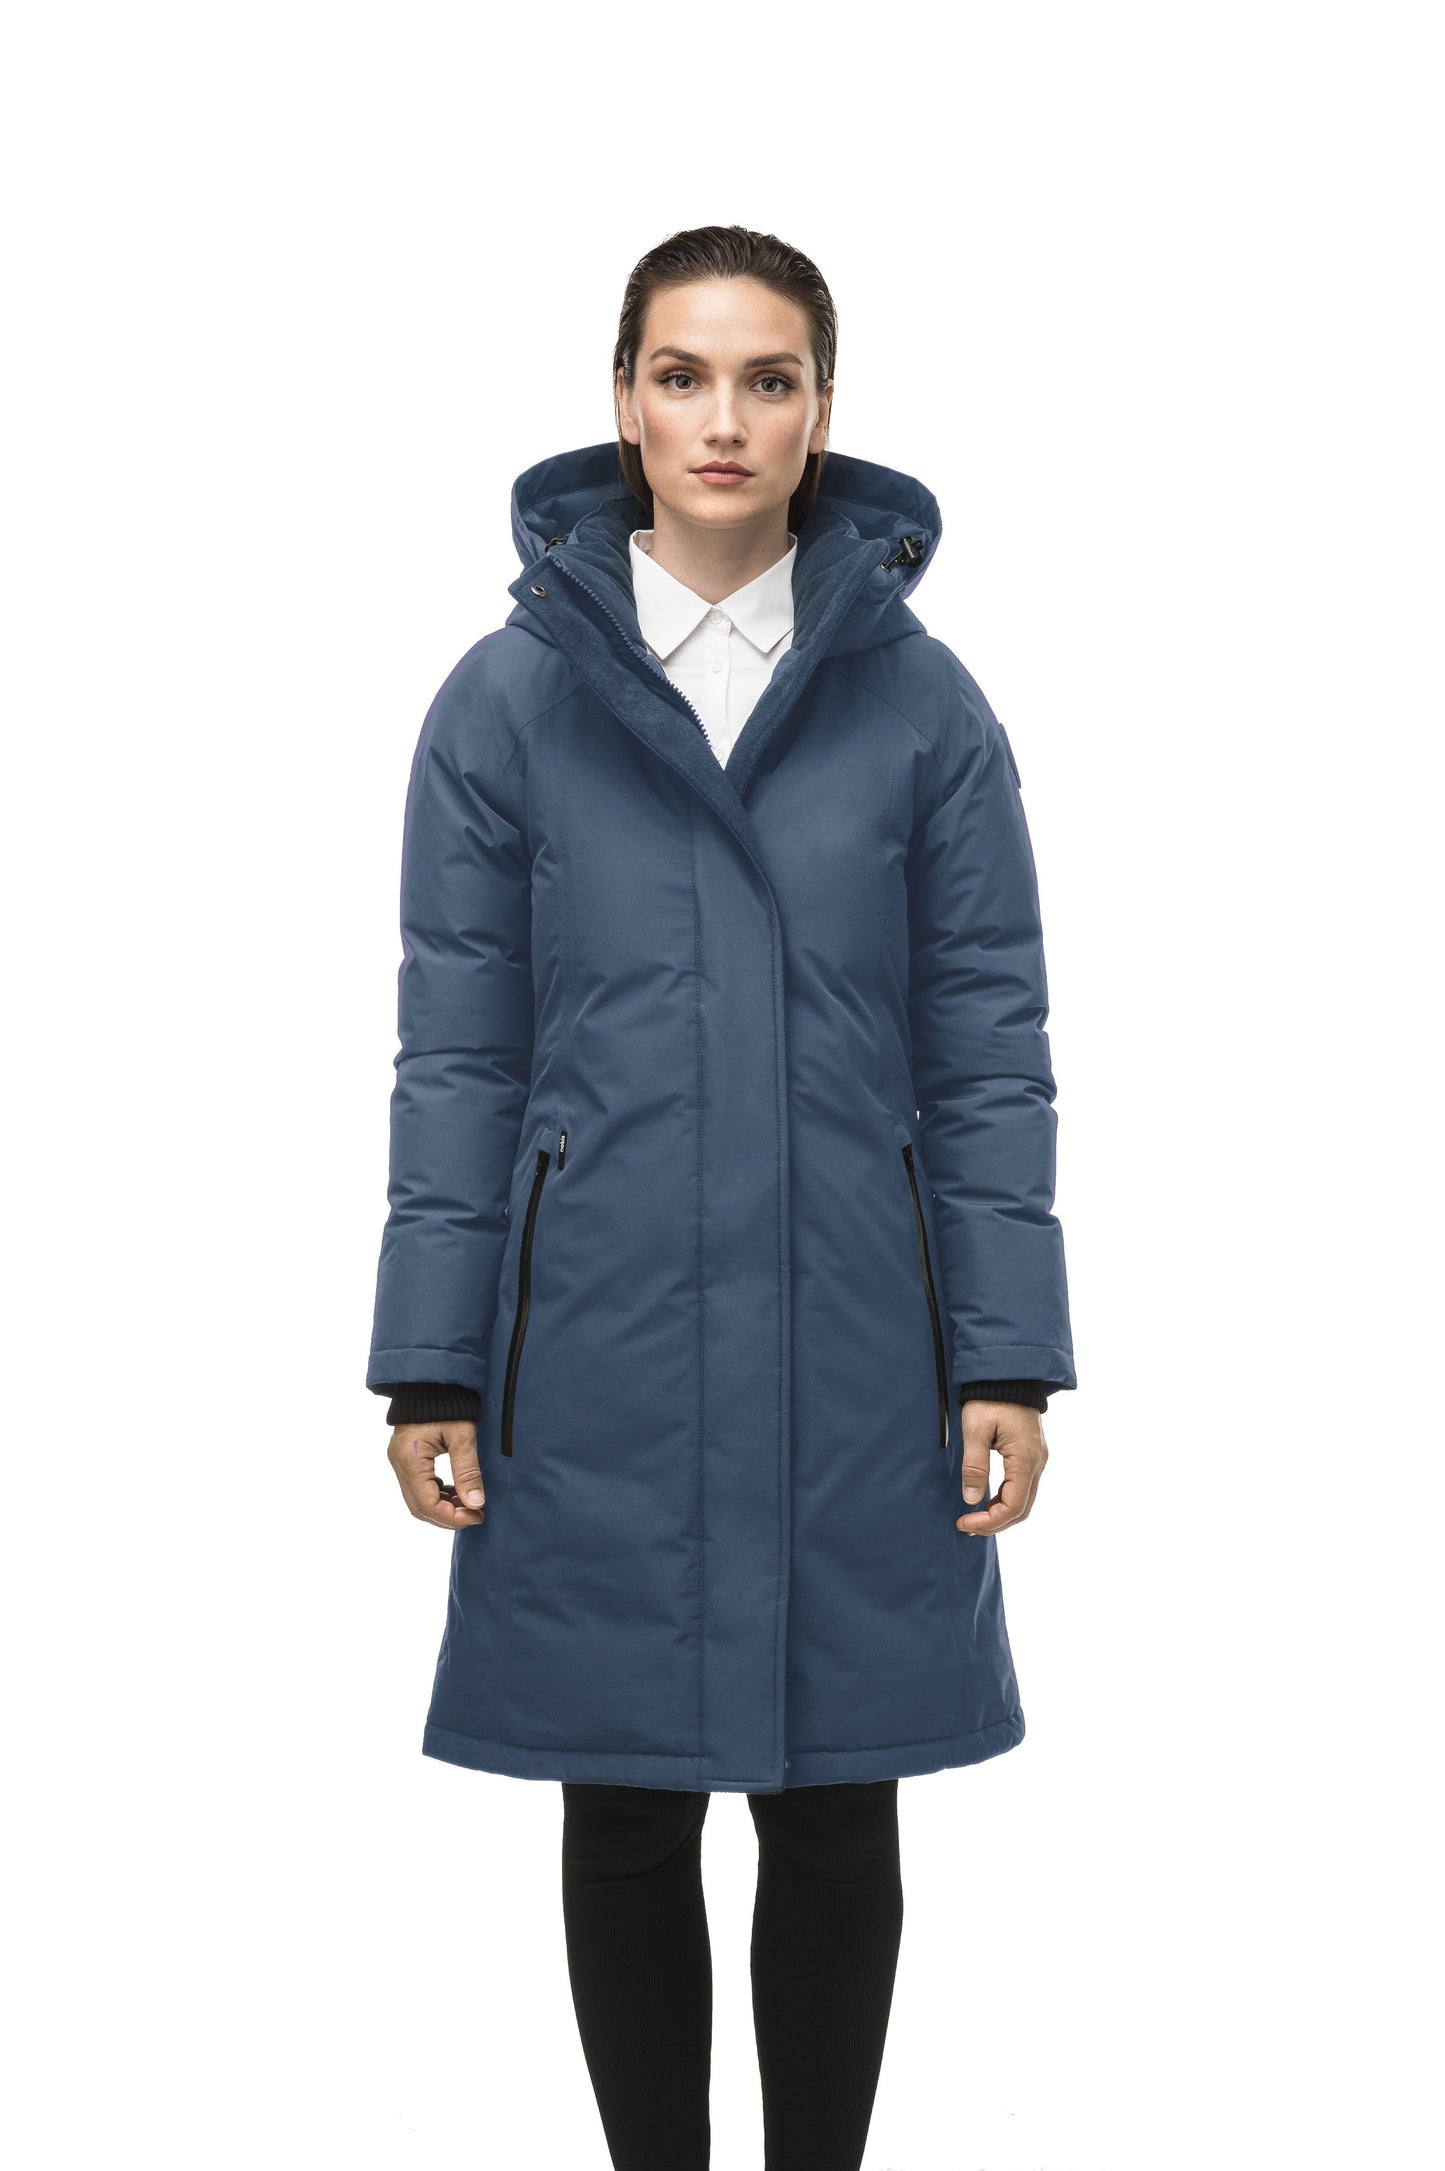 Minimalist down filled women's parka with fur free attached hood in Marine